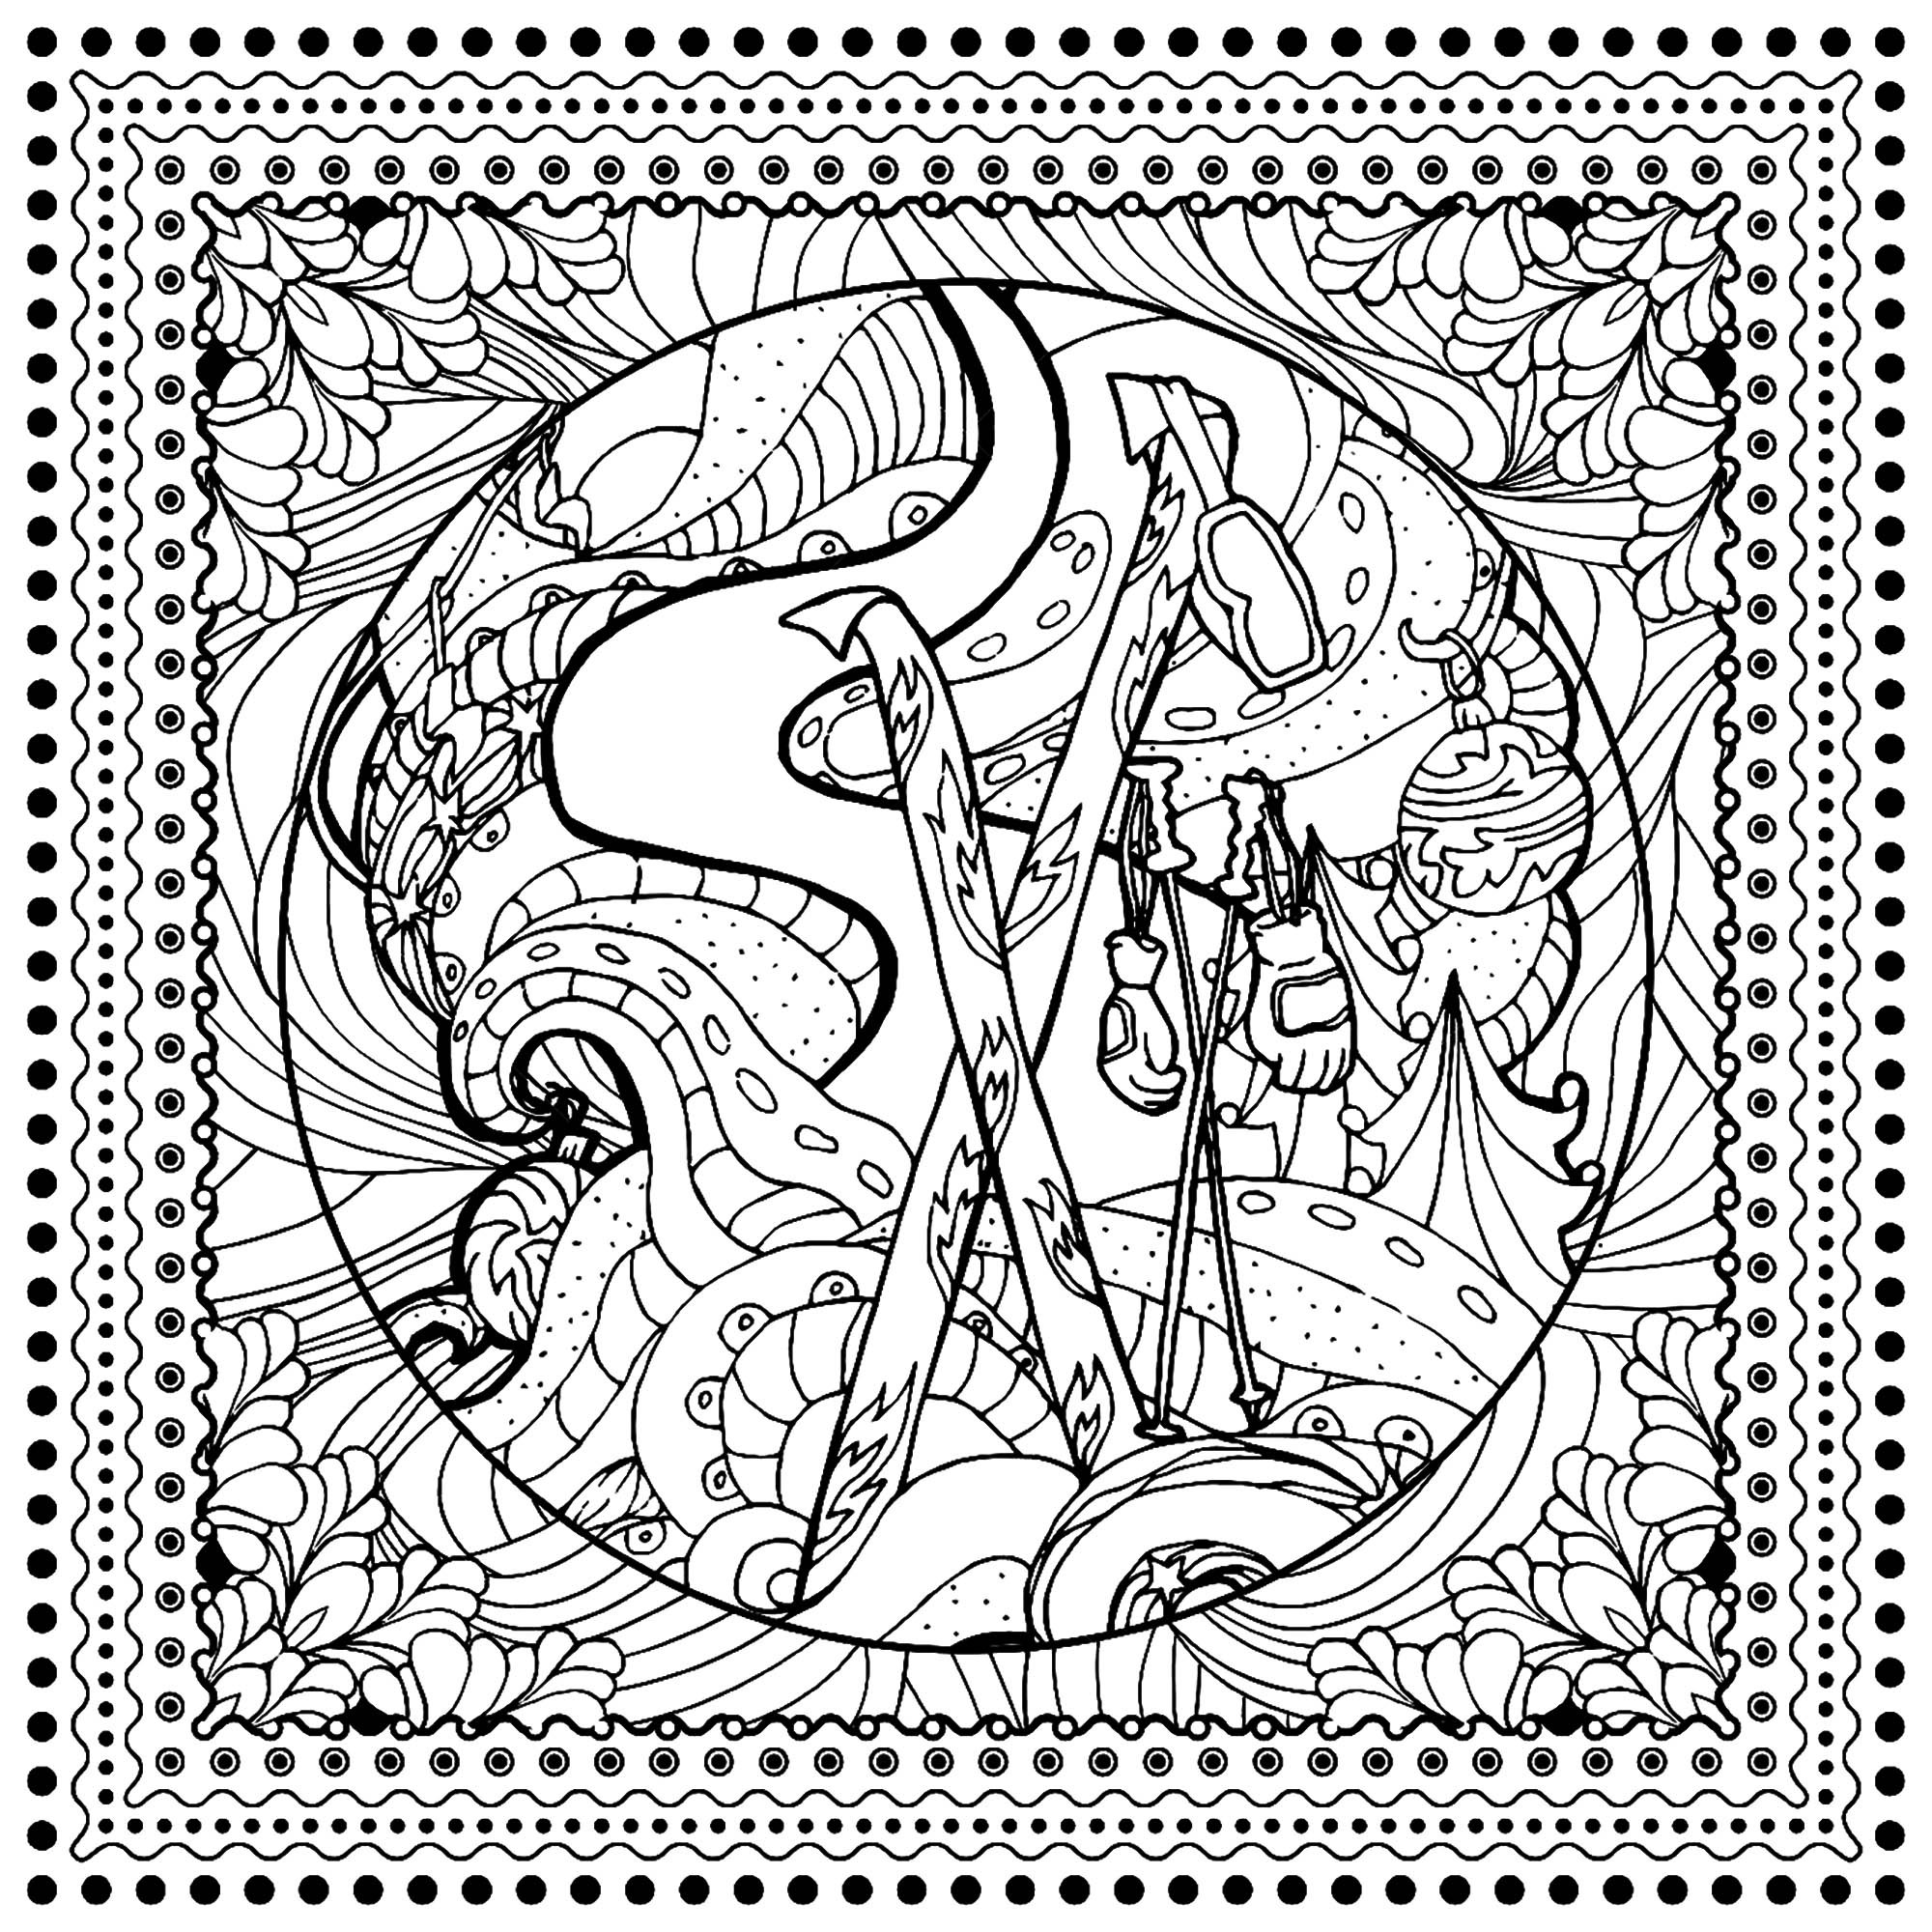 Sports Coloring Books For Adults
 Winter sports ilonitta Christmas Adult Coloring Pages